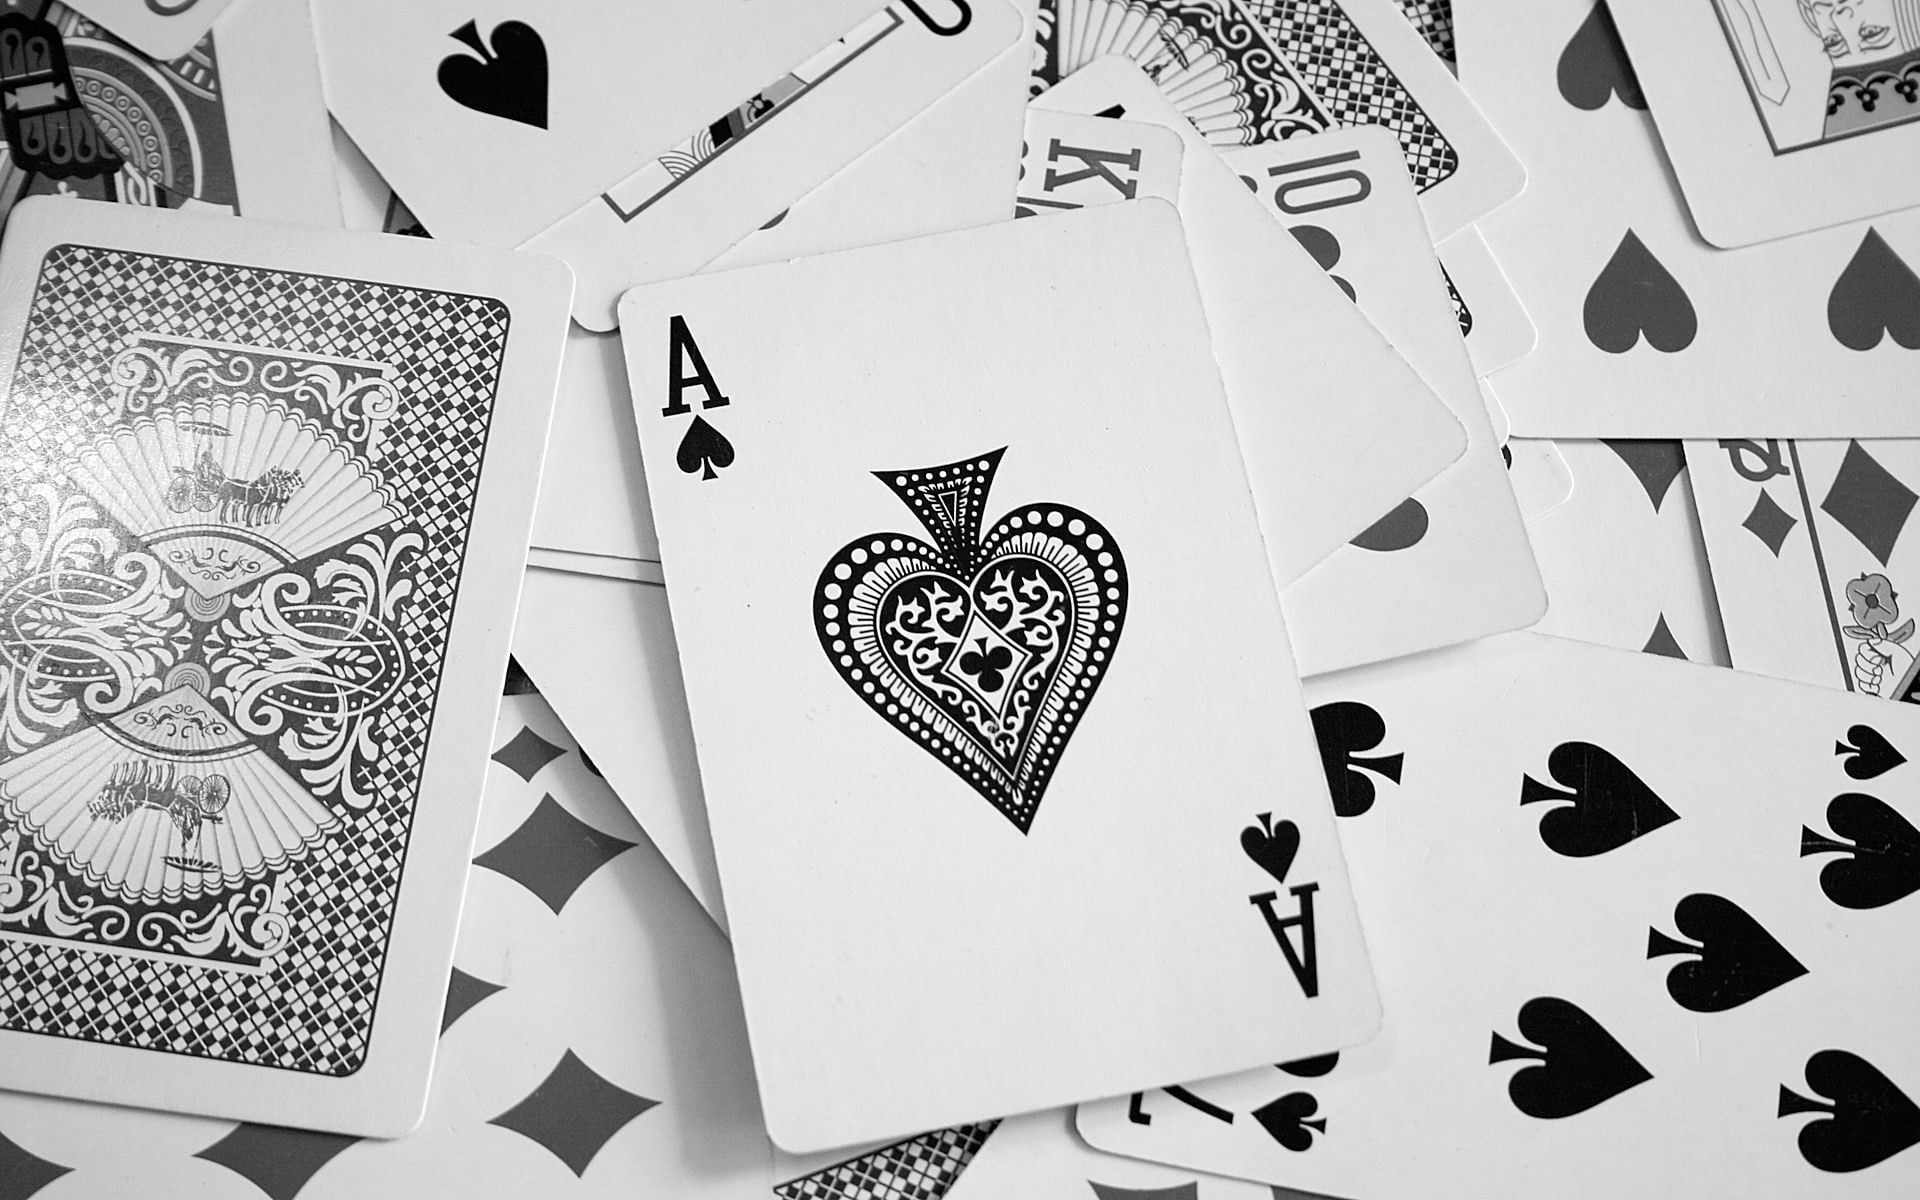 1920x1200 playing card lot #cards Ace of Spades #monochrome playing cards #1080P # wallpaper #hdwallpaper #desktop | Fun card games, Cards, Ace card